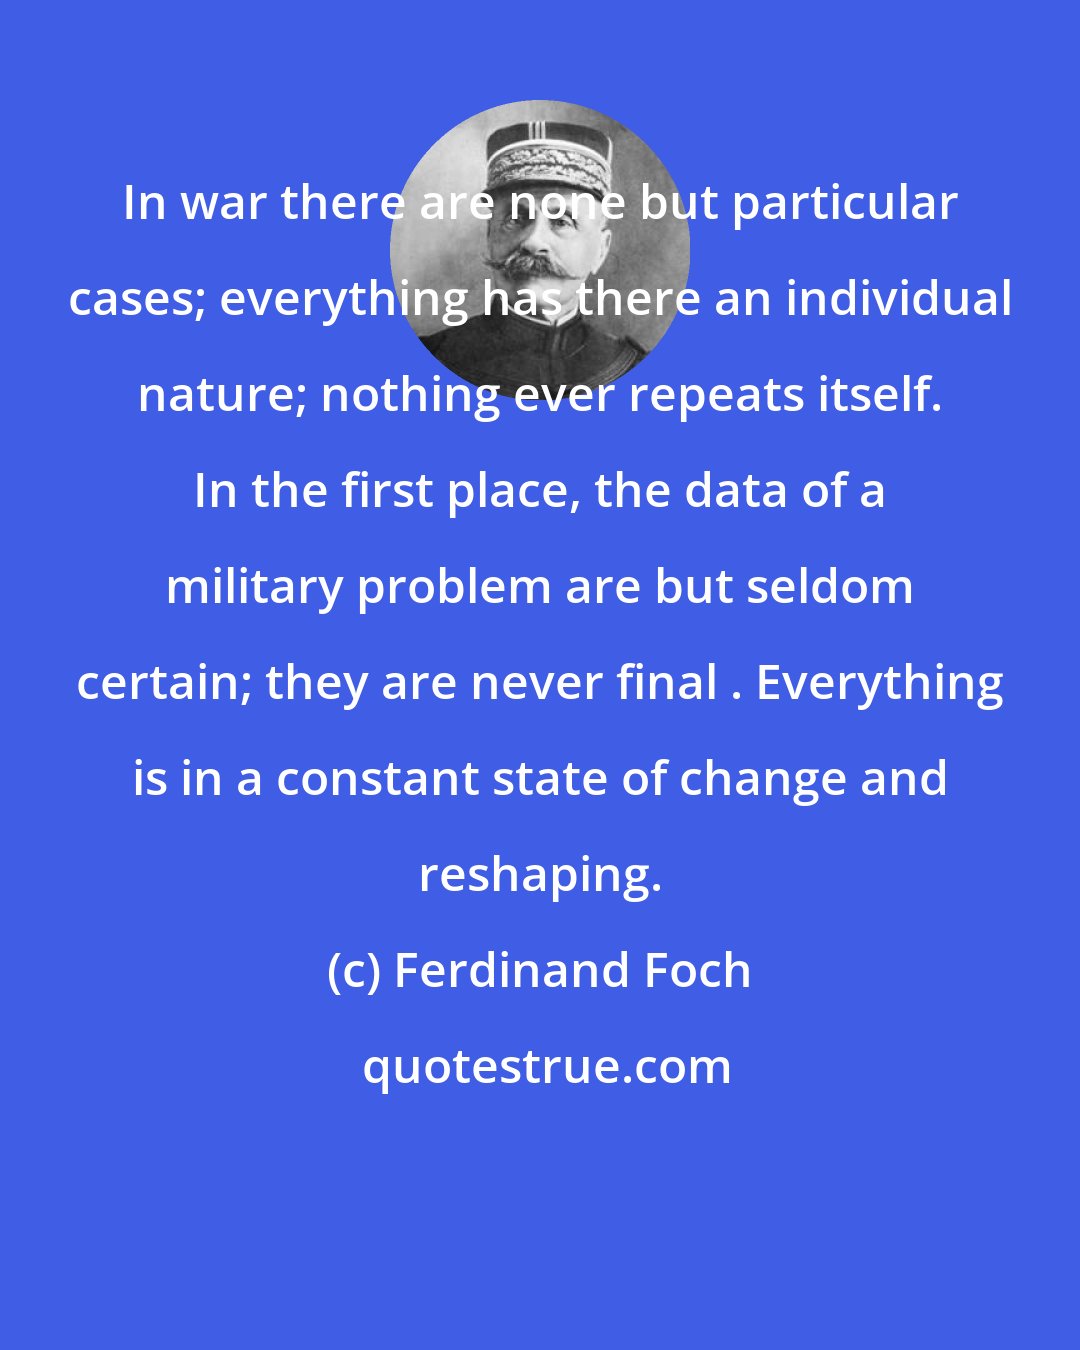 Ferdinand Foch: In war there are none but particular cases; everything has there an individual nature; nothing ever repeats itself. In the first place, the data of a military problem are but seldom certain; they are never final . Everything is in a constant state of change and reshaping.